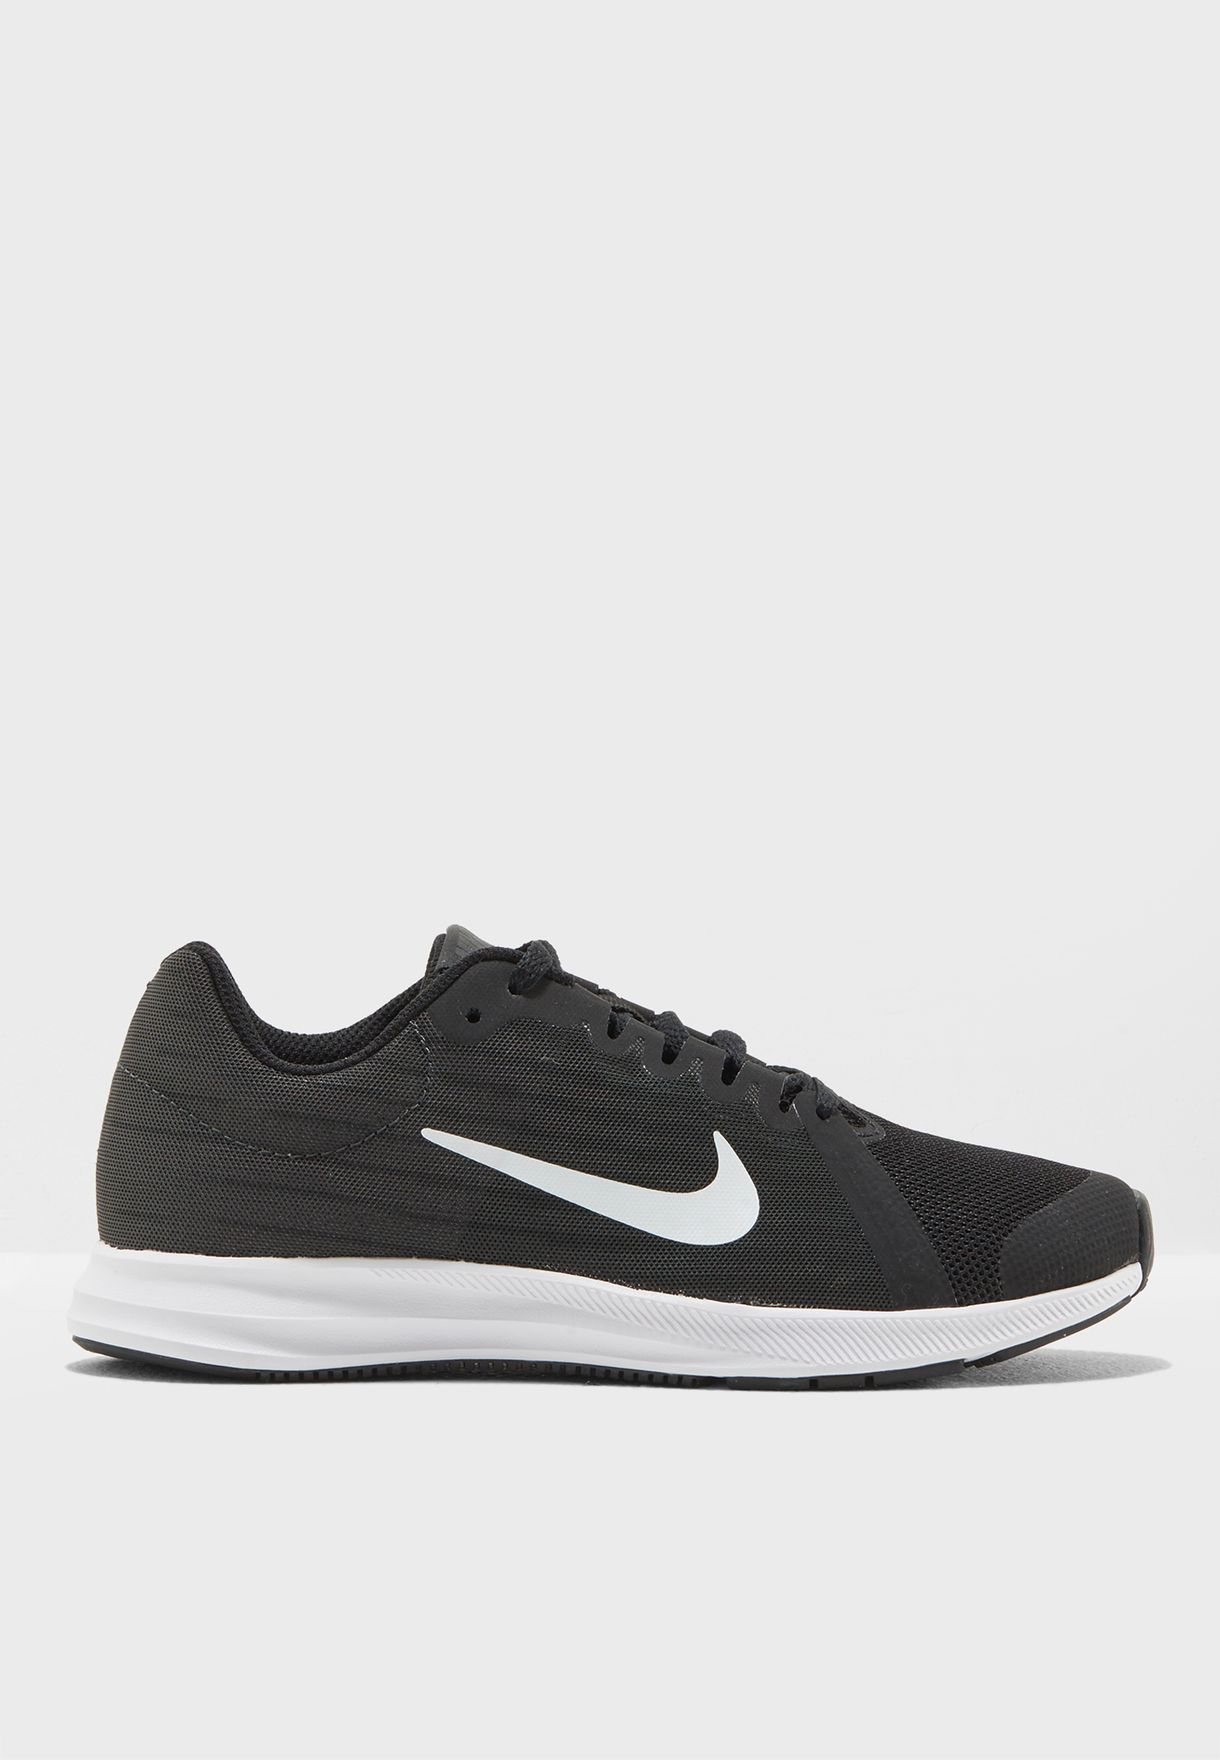 nike downshifter 8 youth